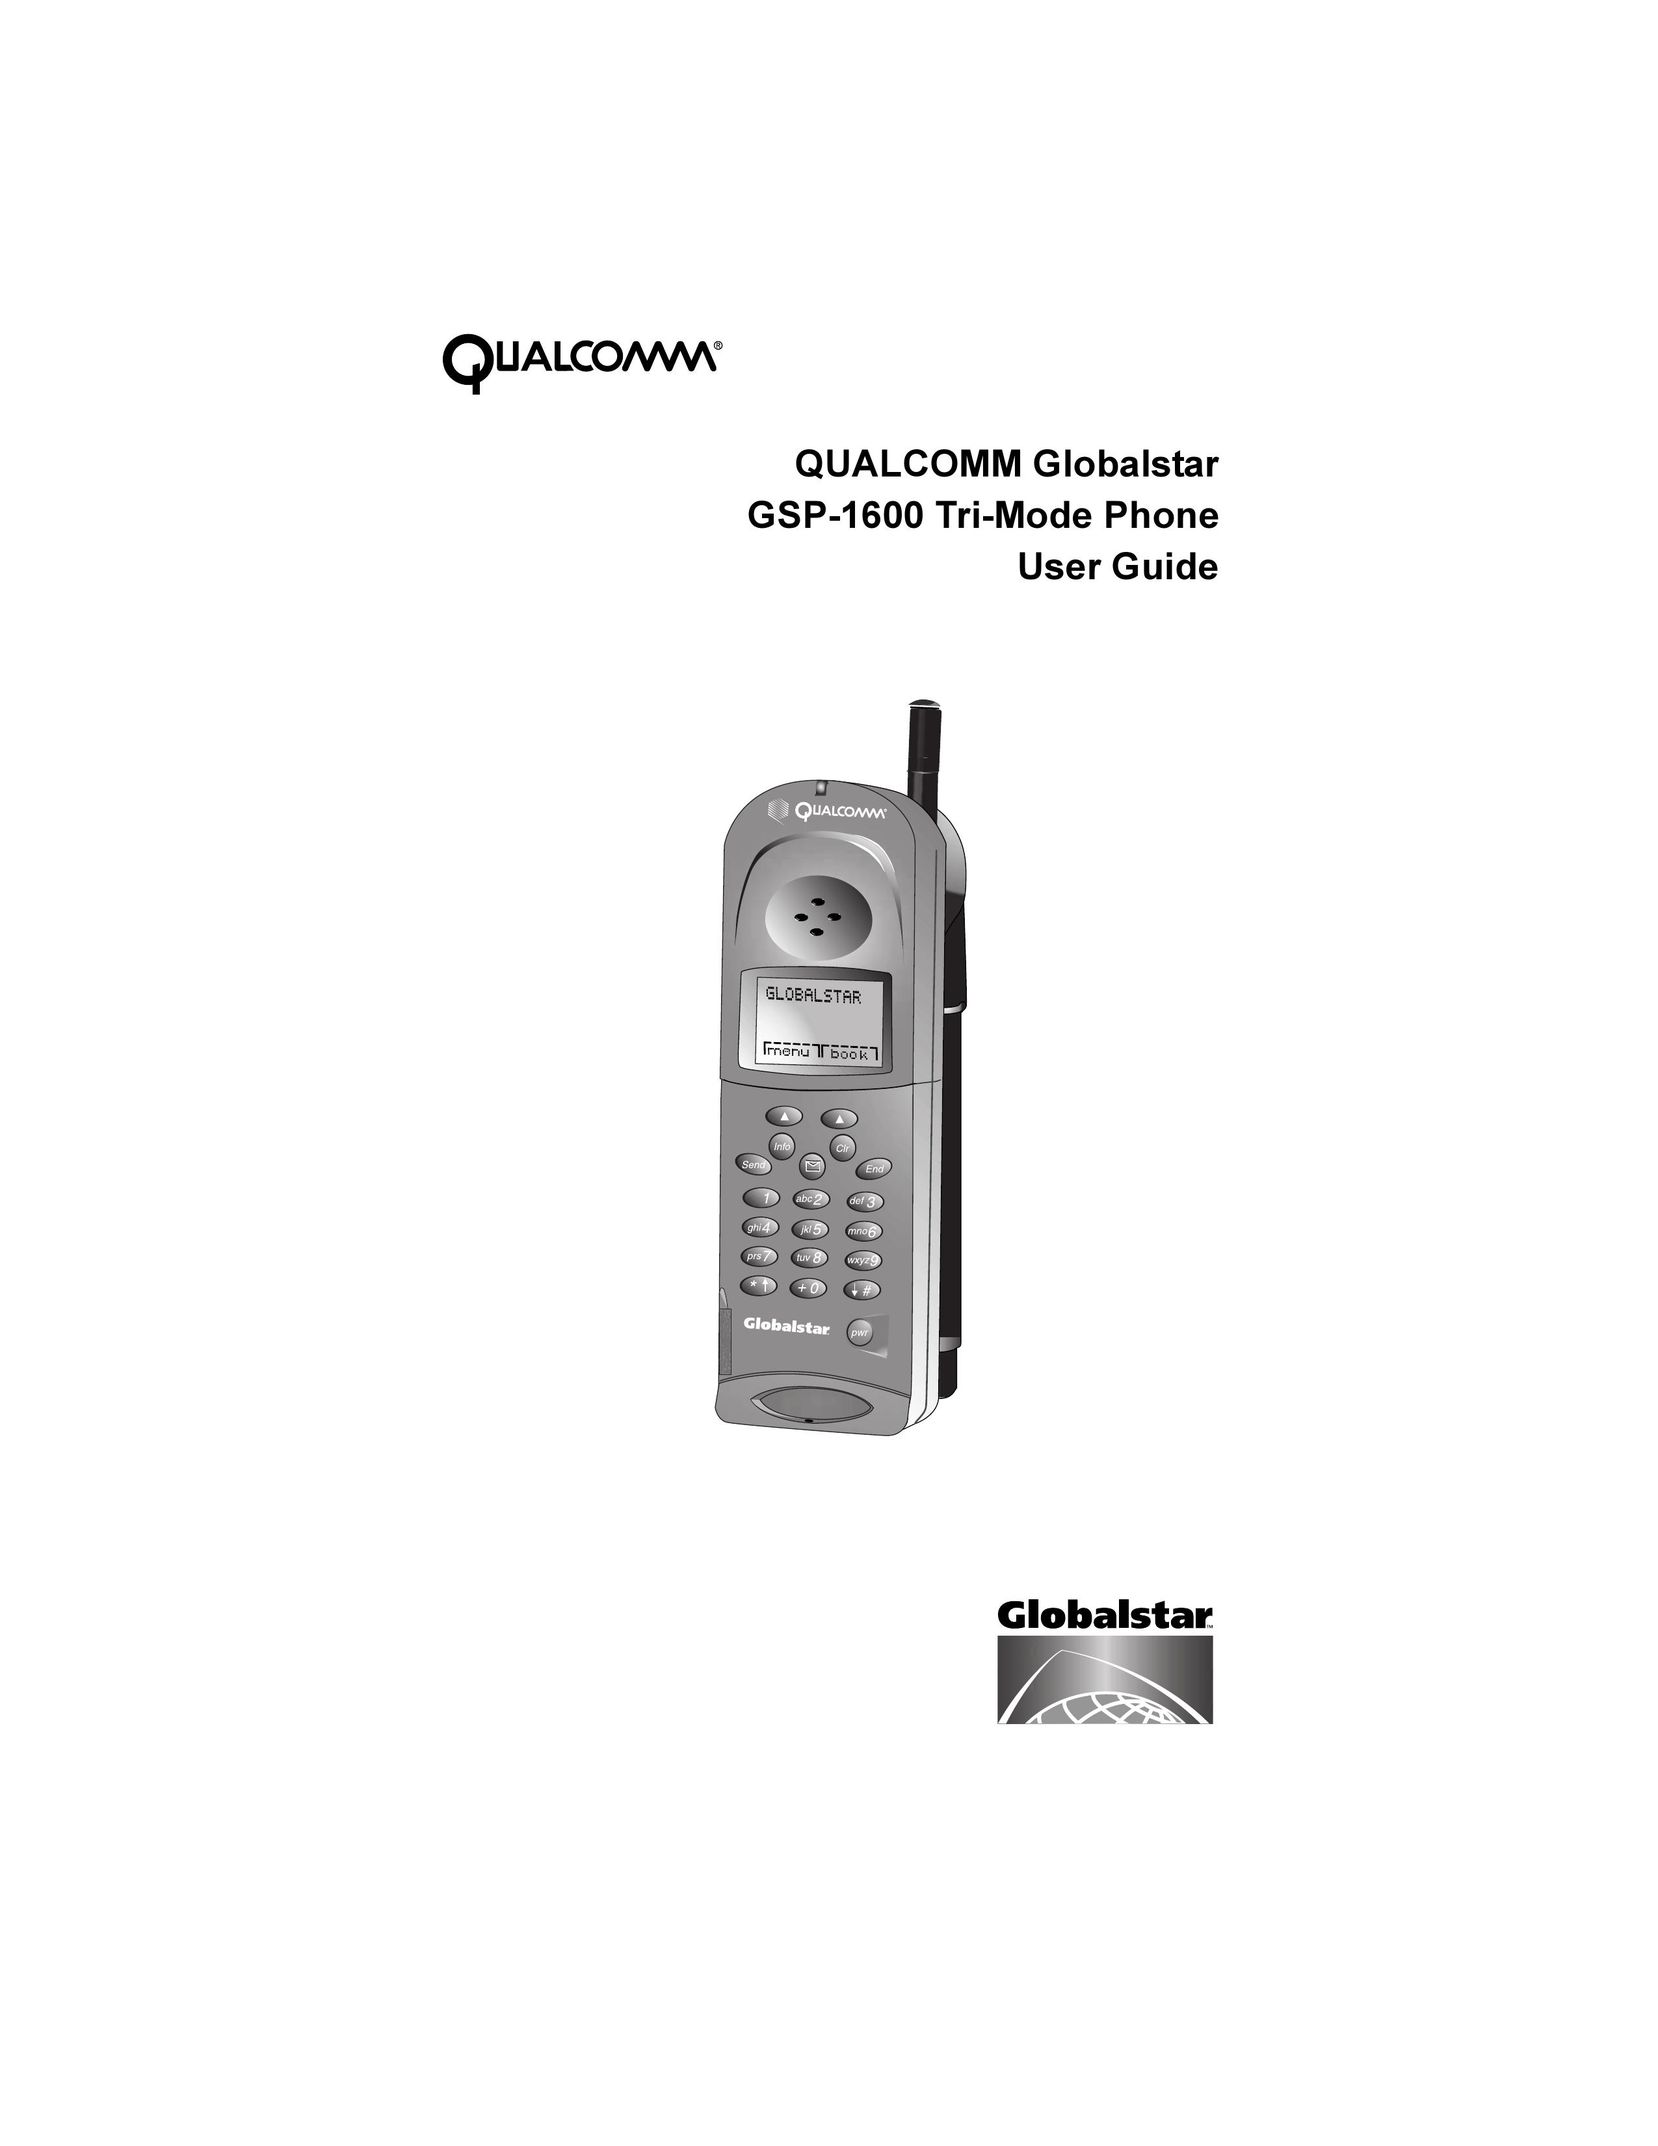 Qualcomm GSP-1600 Cell Phone User Manual